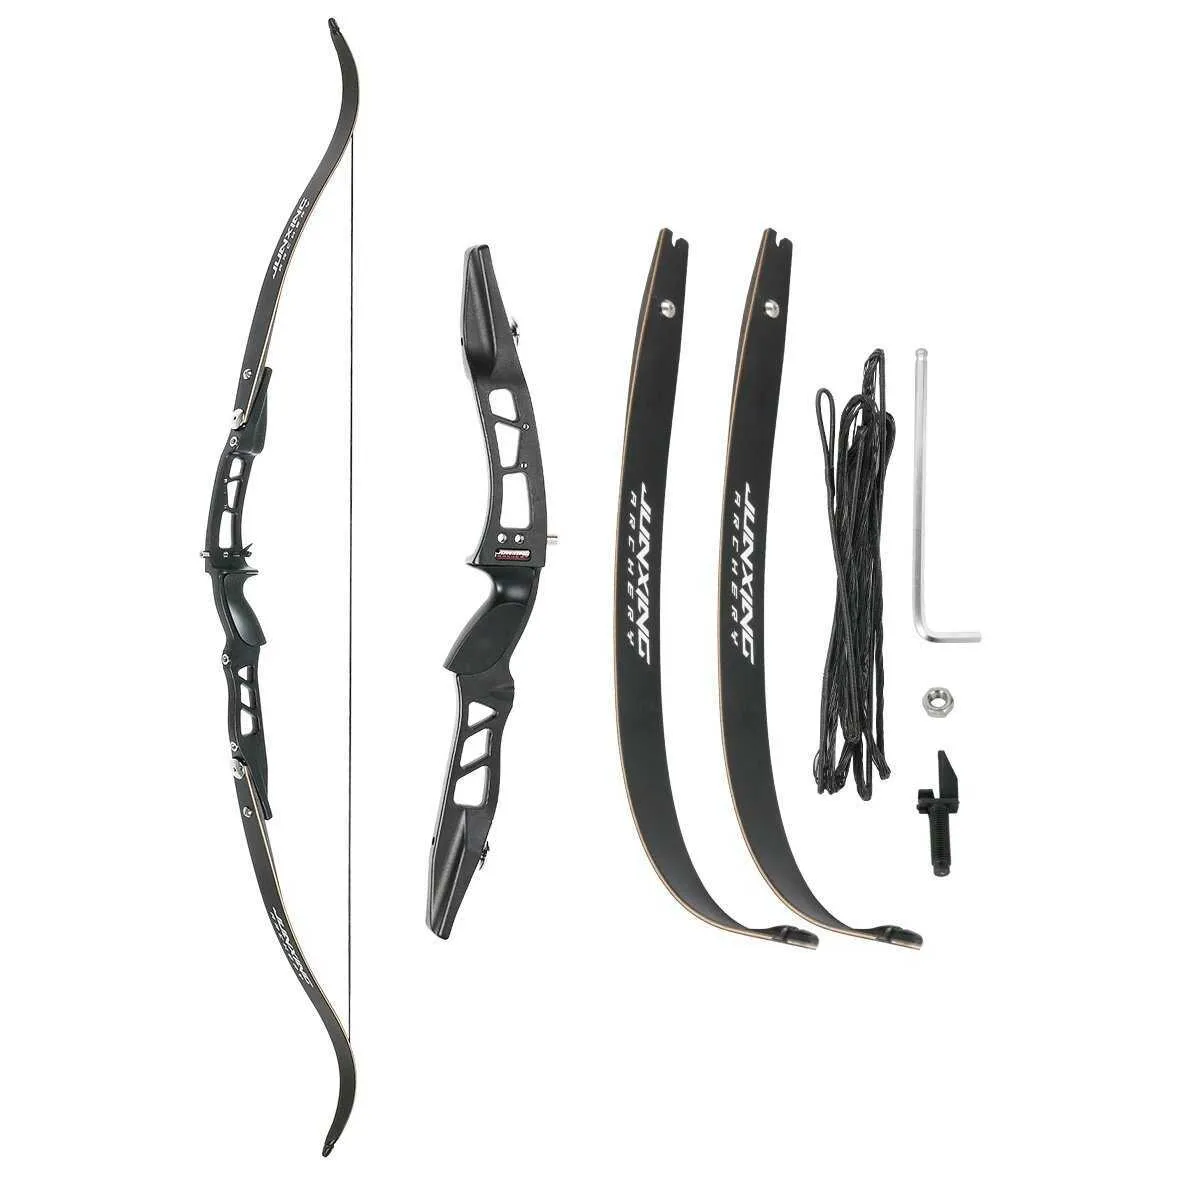 Bow Arrow F167 Recurve Bow 66 Inches 20-40 Lbs ILF Interface for Right Hand User Archery Hunting ShootingHKD230626